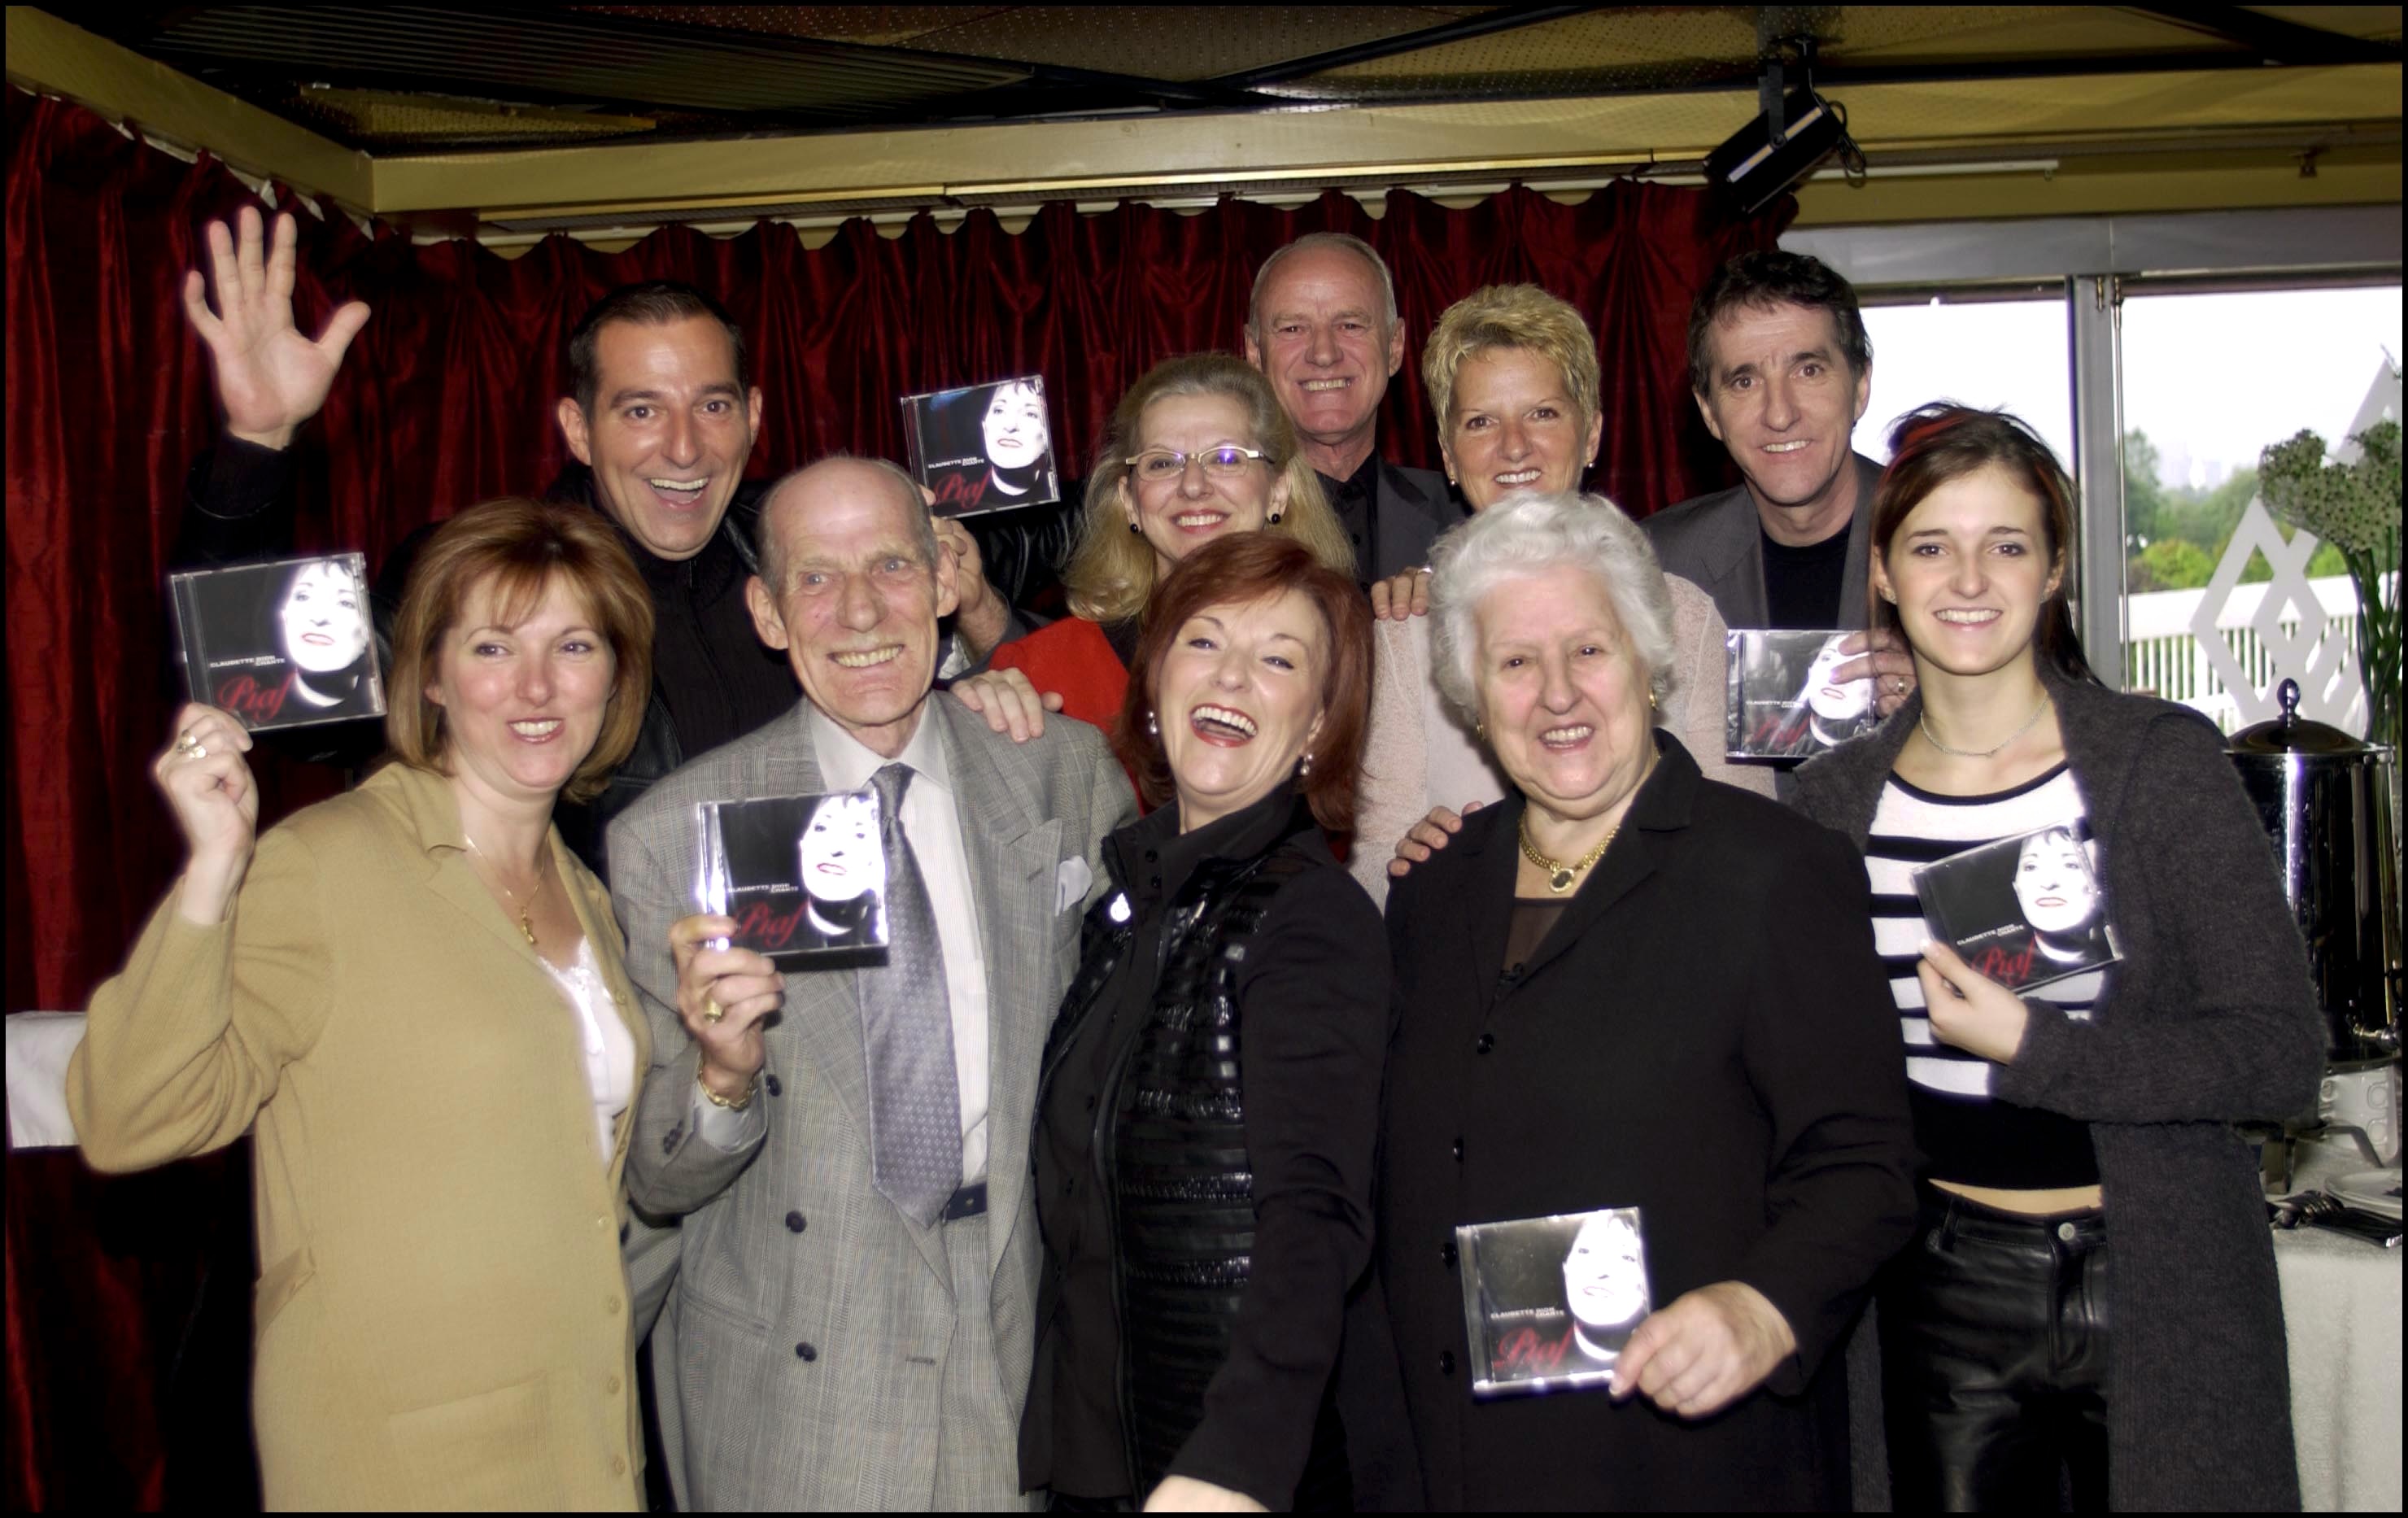 Claudette, Adhémar, and Thérèse Dion with other siblings and relatives in Montreal, Canada, on October 11, 2002. | Source: Getty Images